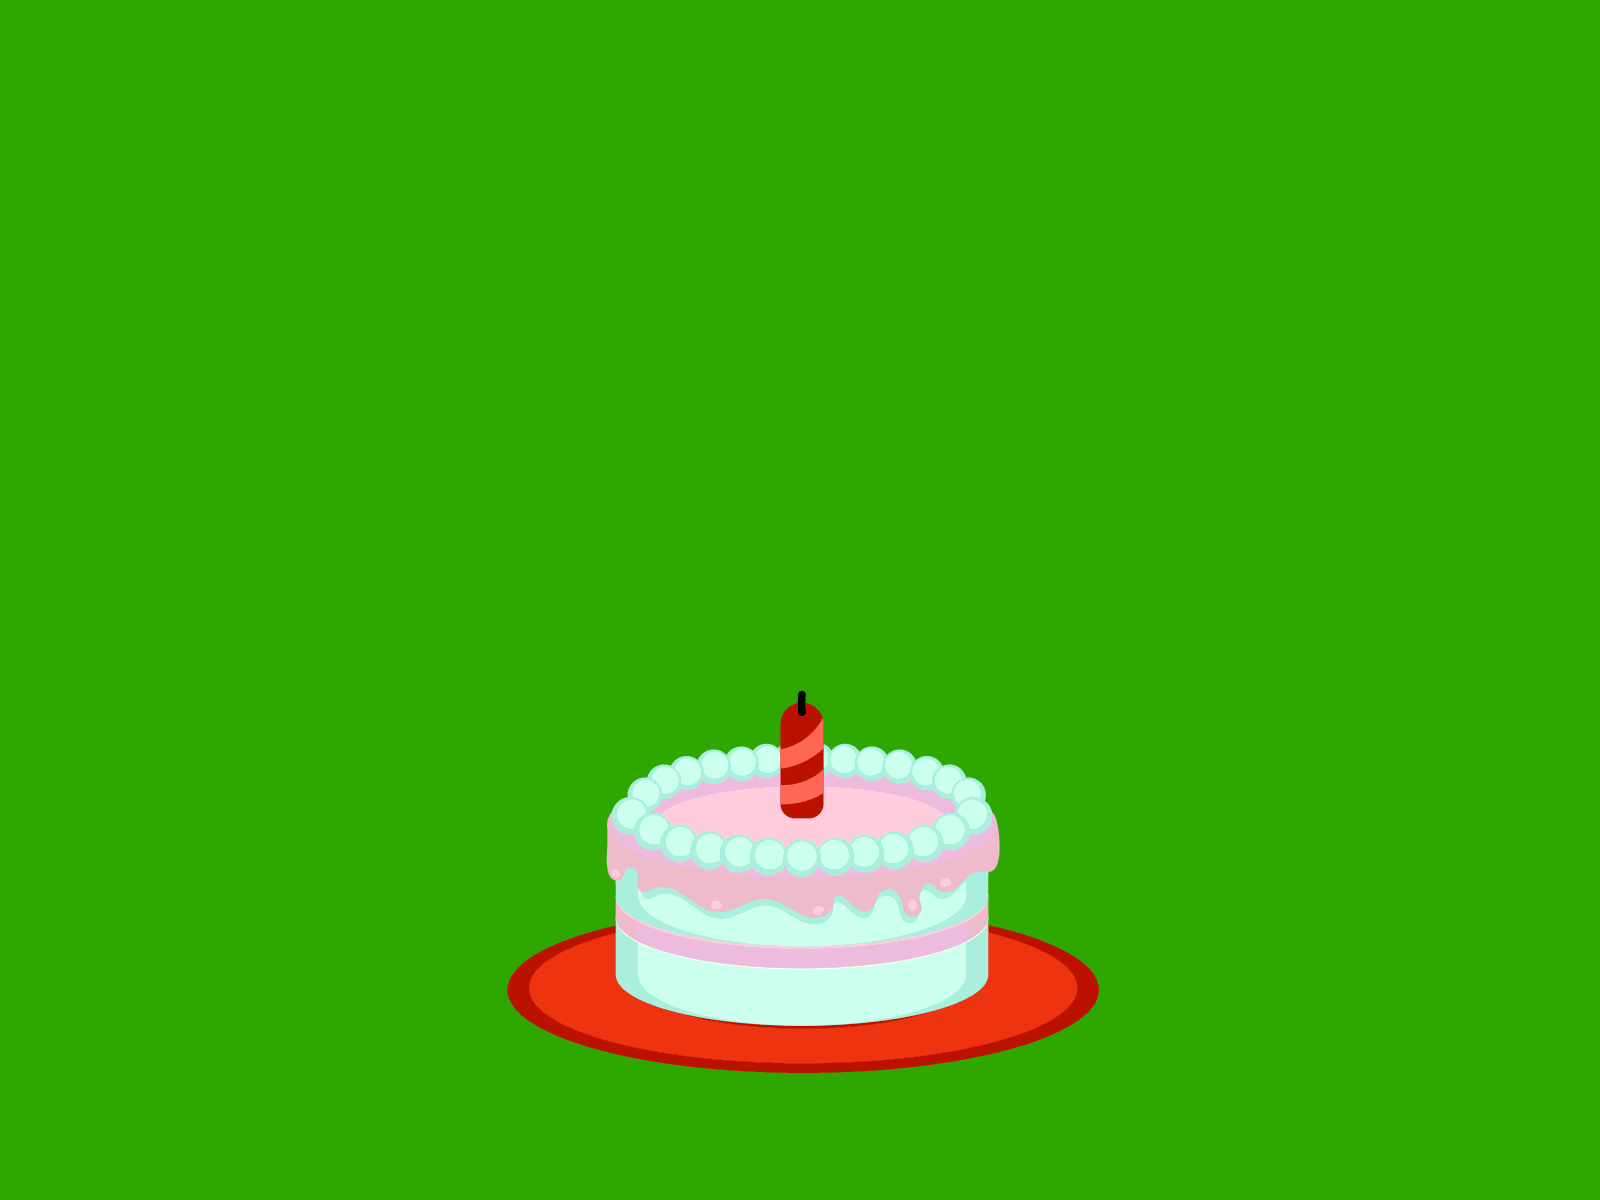 Lighting a Number Four Birthday Candle on a Delicious Cake, Green Screen 26  Stock Photo - Image of cupcake, dessert: 188843754